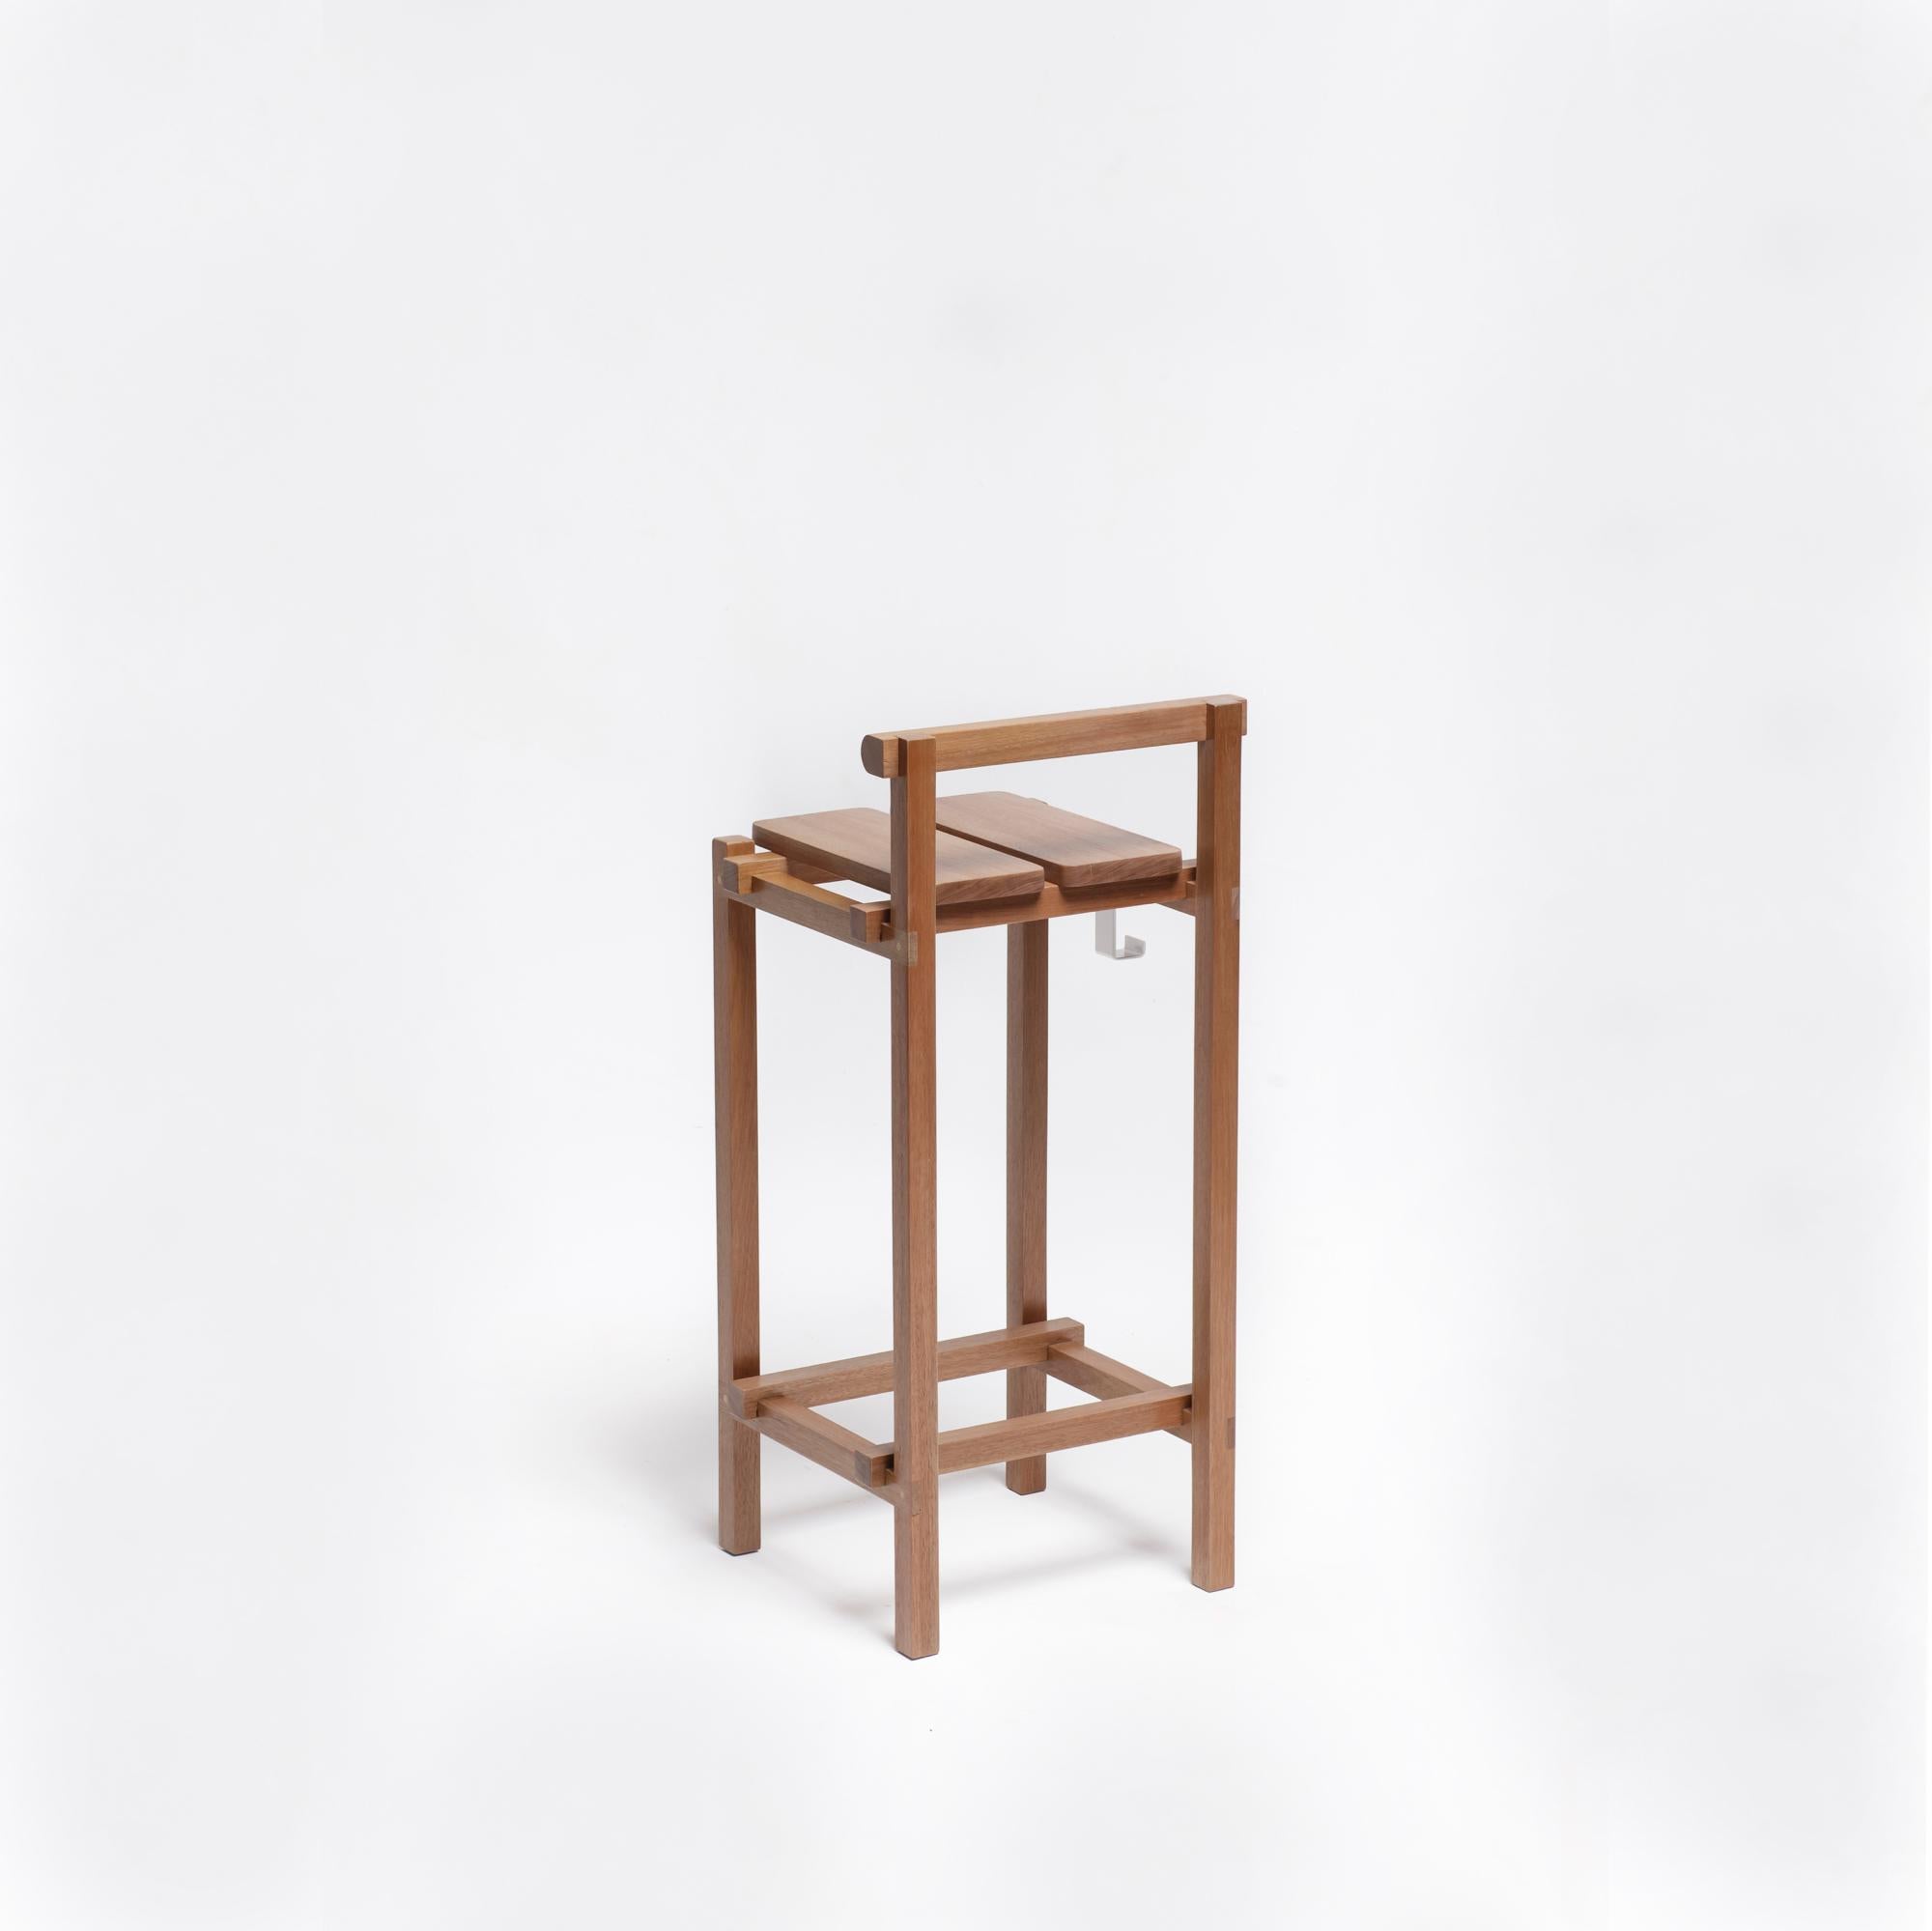 Brazilian M Stool, Contemporary Handcrafted Stool in Hardwood For Sale